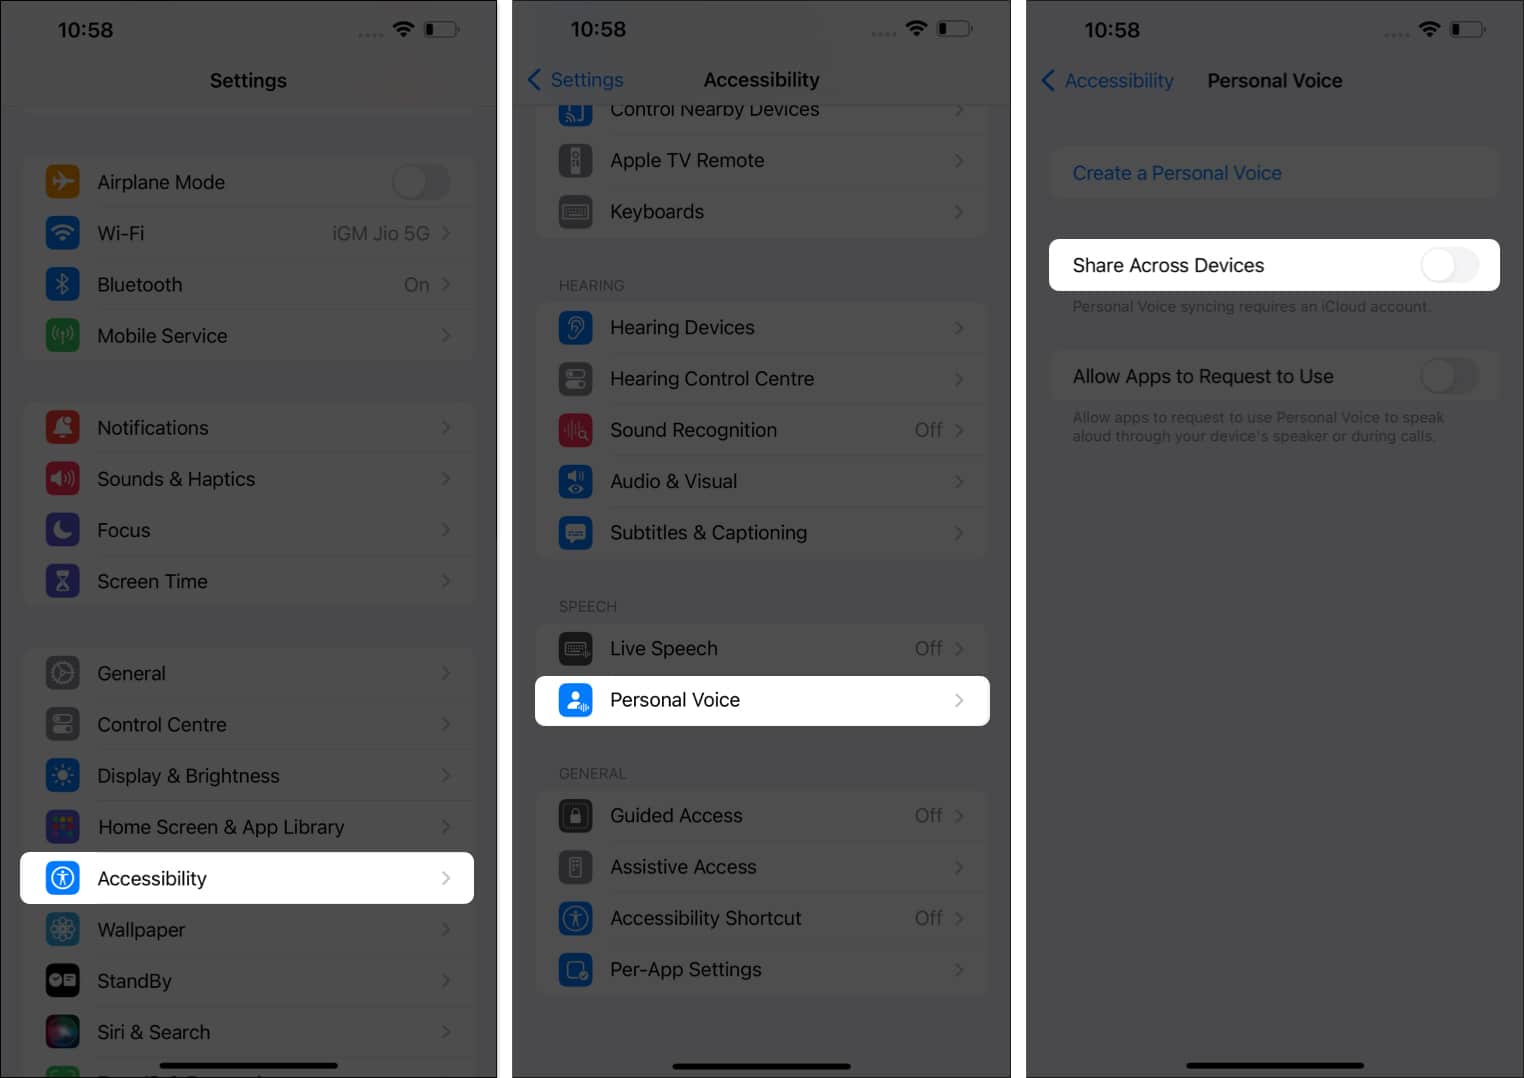 Go to Accessibility, select Personal Voice, toggle off Share Across Devices